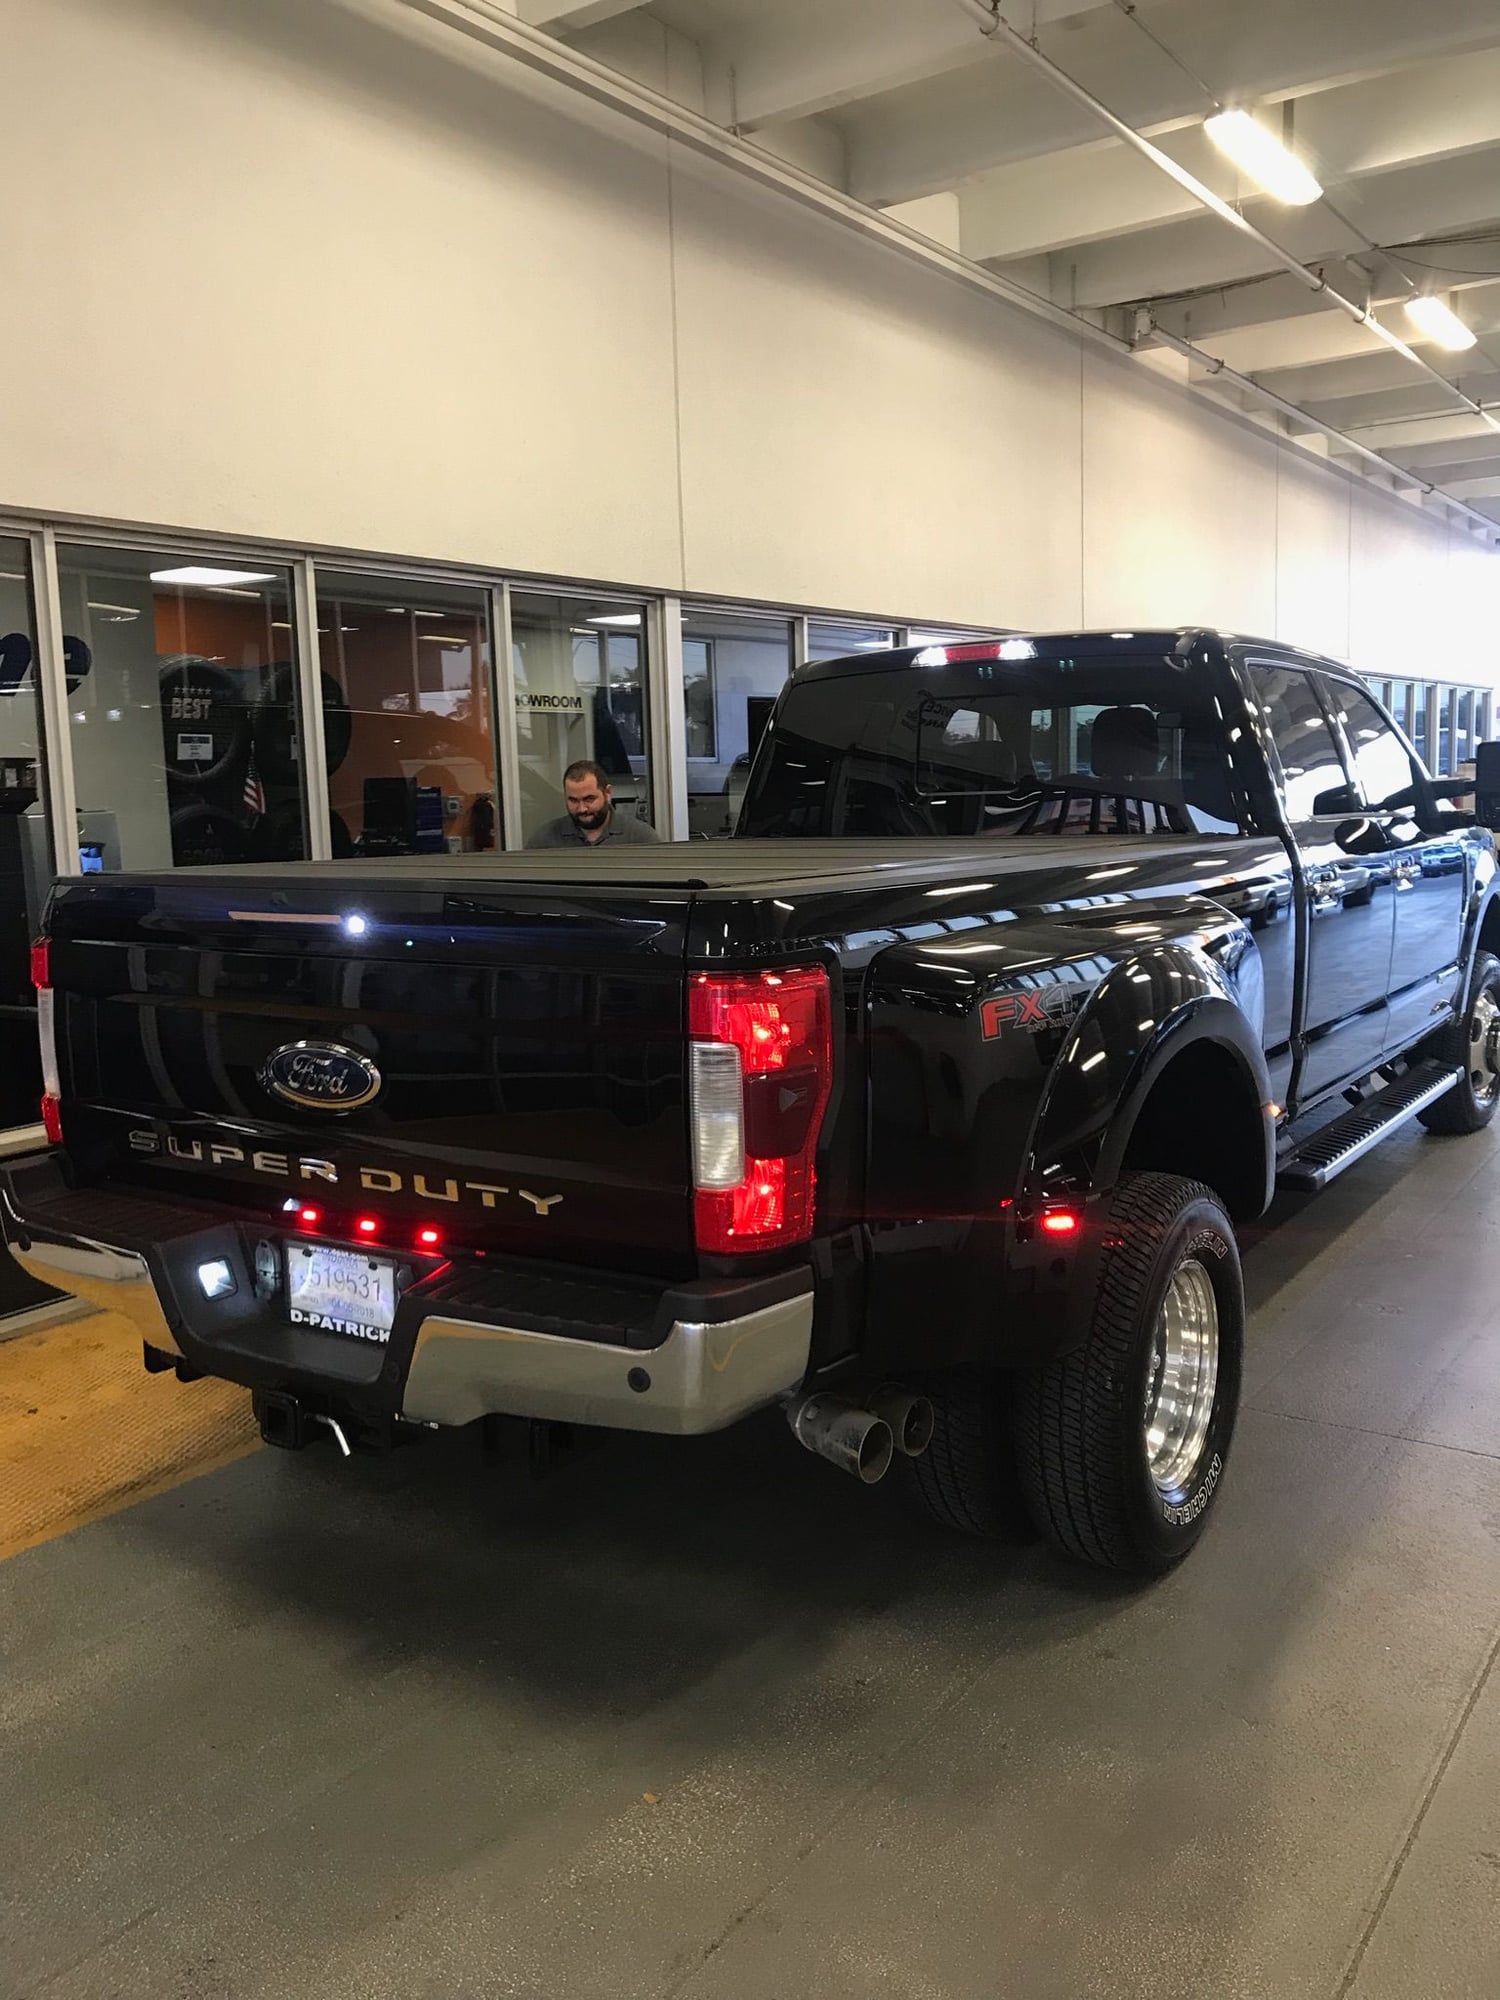 Lights - 2017+ Superduty Headlights/Foglights/Taillights - Used - 2017 to 2019 Ford F-350 Super Duty - West Palm Beach, FL 33407, United States